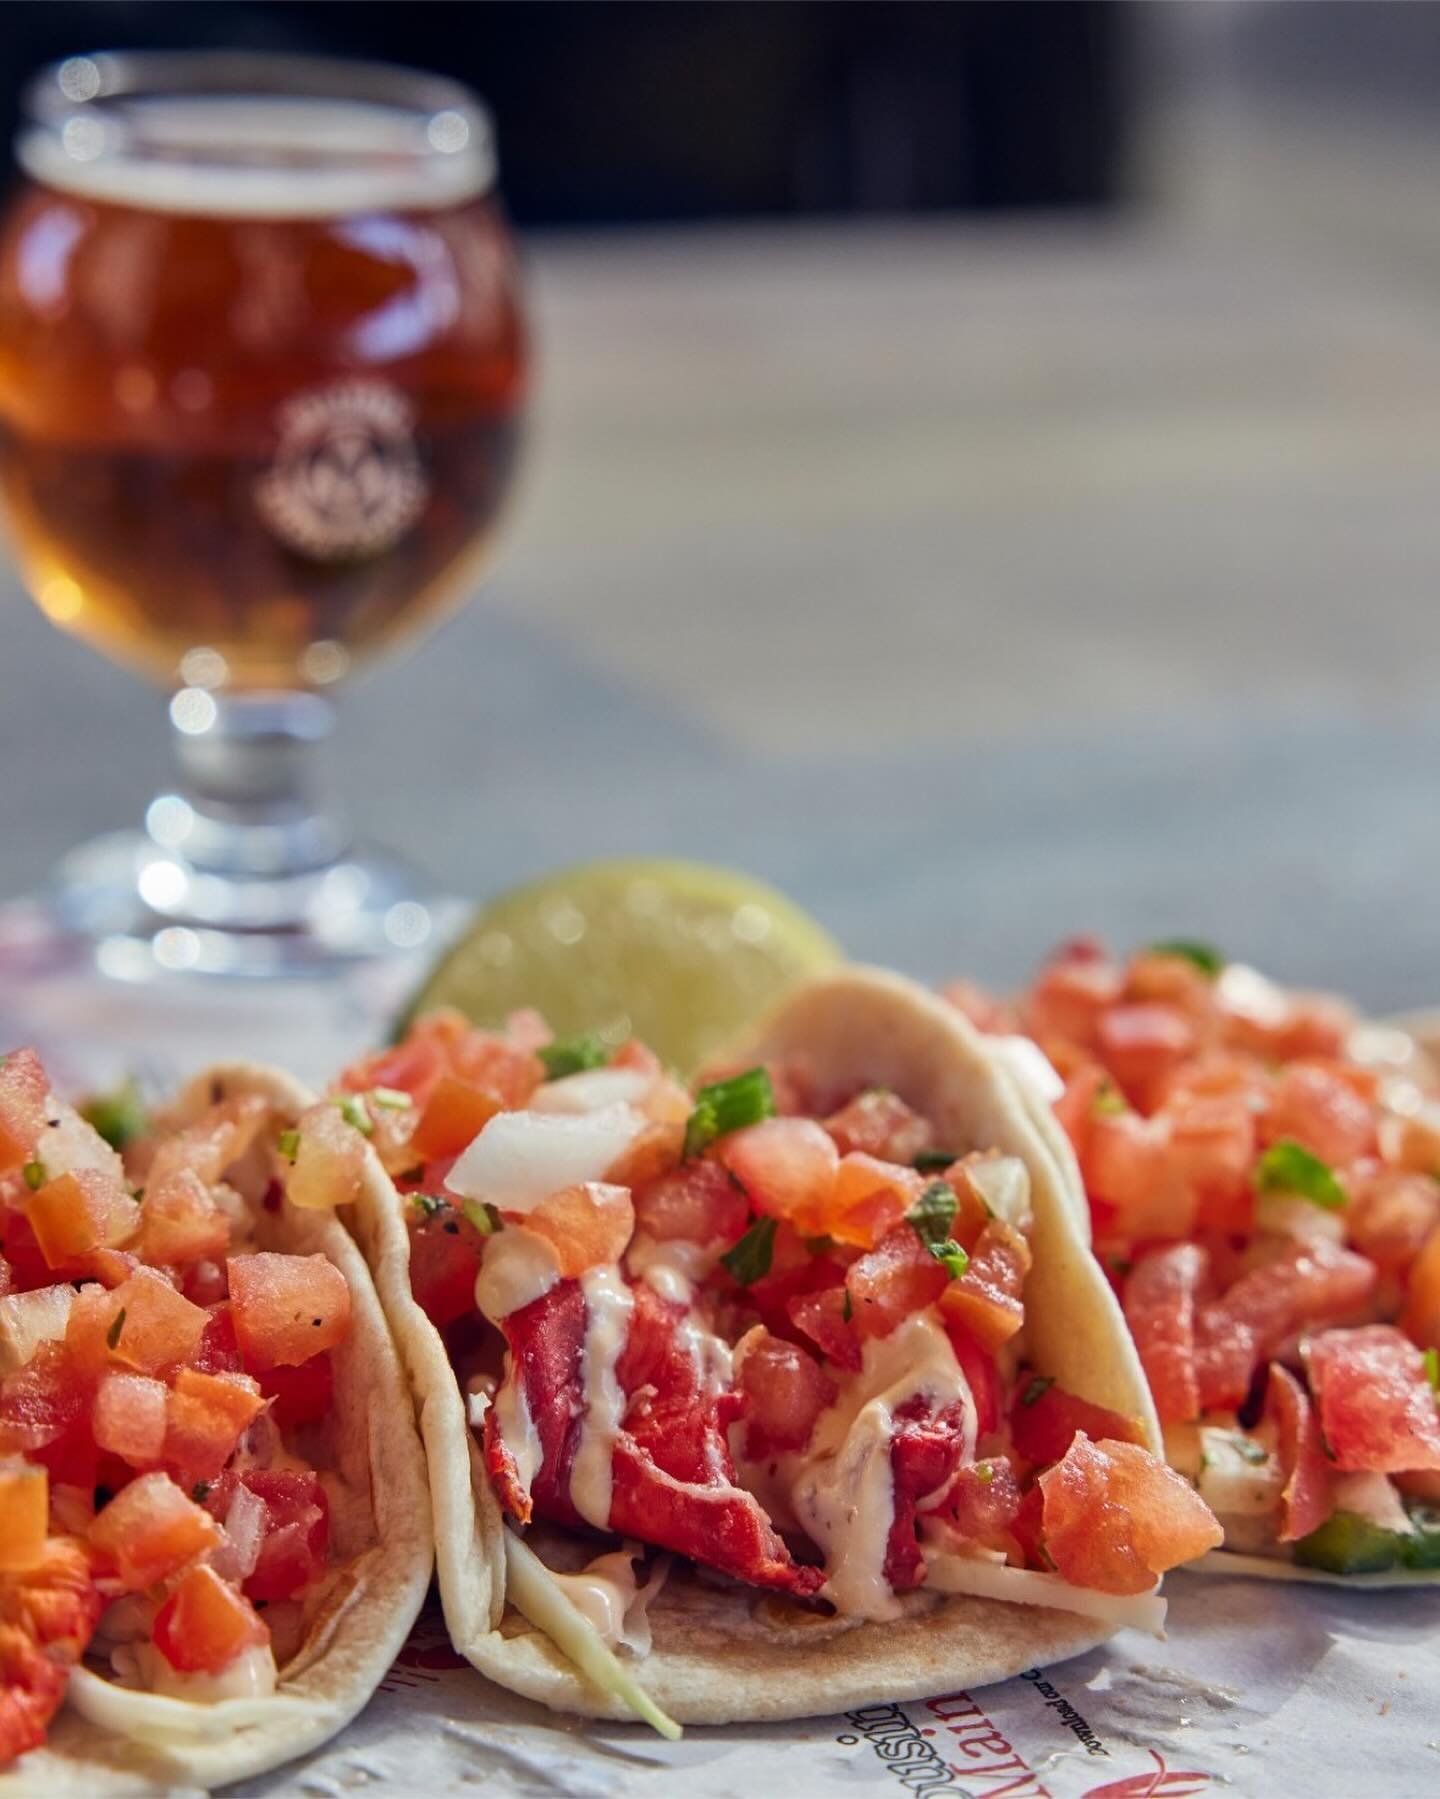 Get down with your bad self! Lobster tacos, cervezas, margaritas, live music this Sunday #cincodemayo